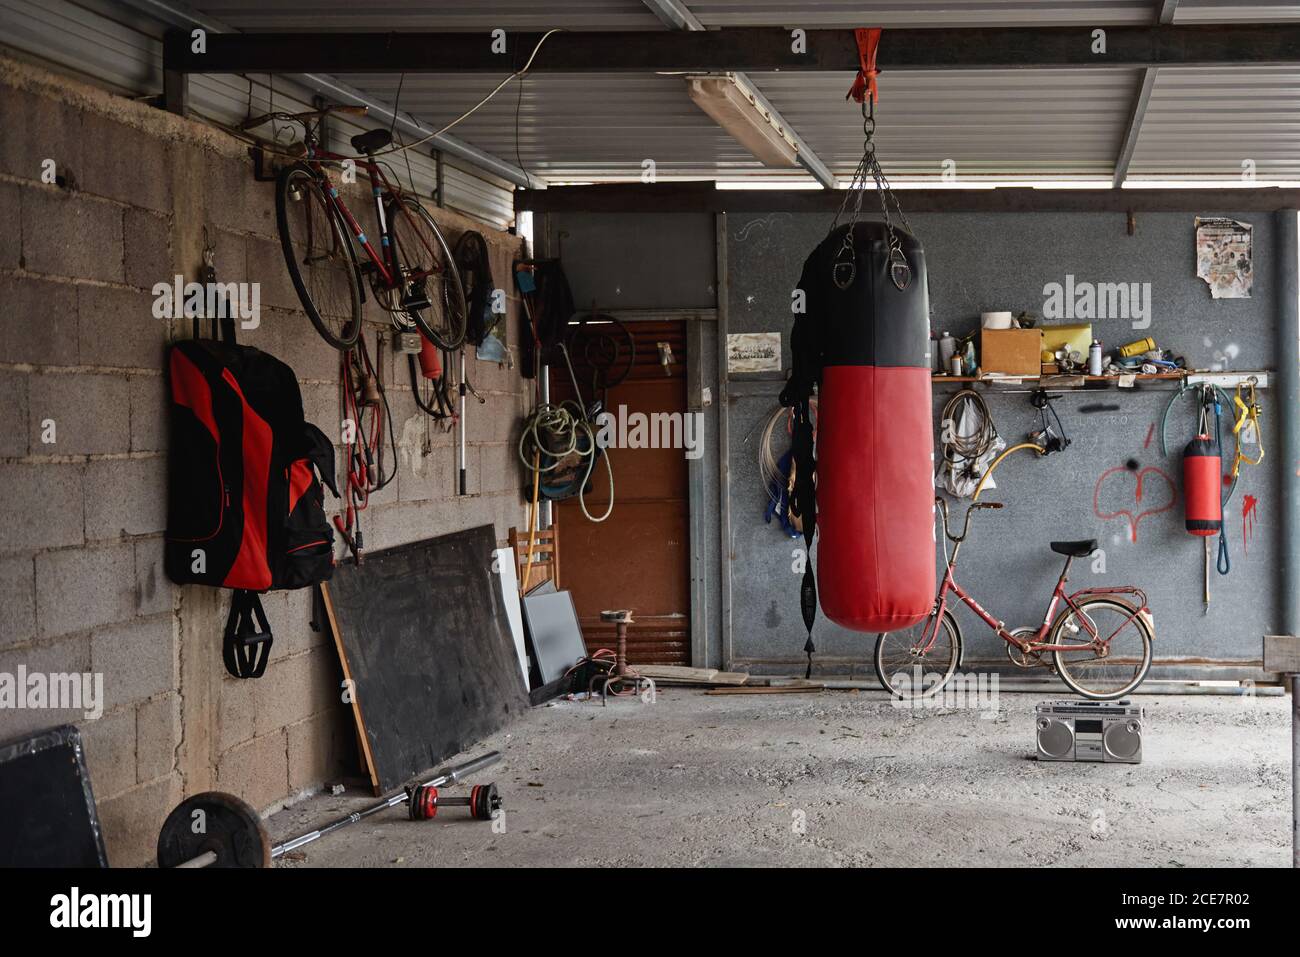 Interior of shabby country garage gym with boxing bag bicycles and sports  equipment placed on concrete floor near old fashioned boombox Stock Photo -  Alamy